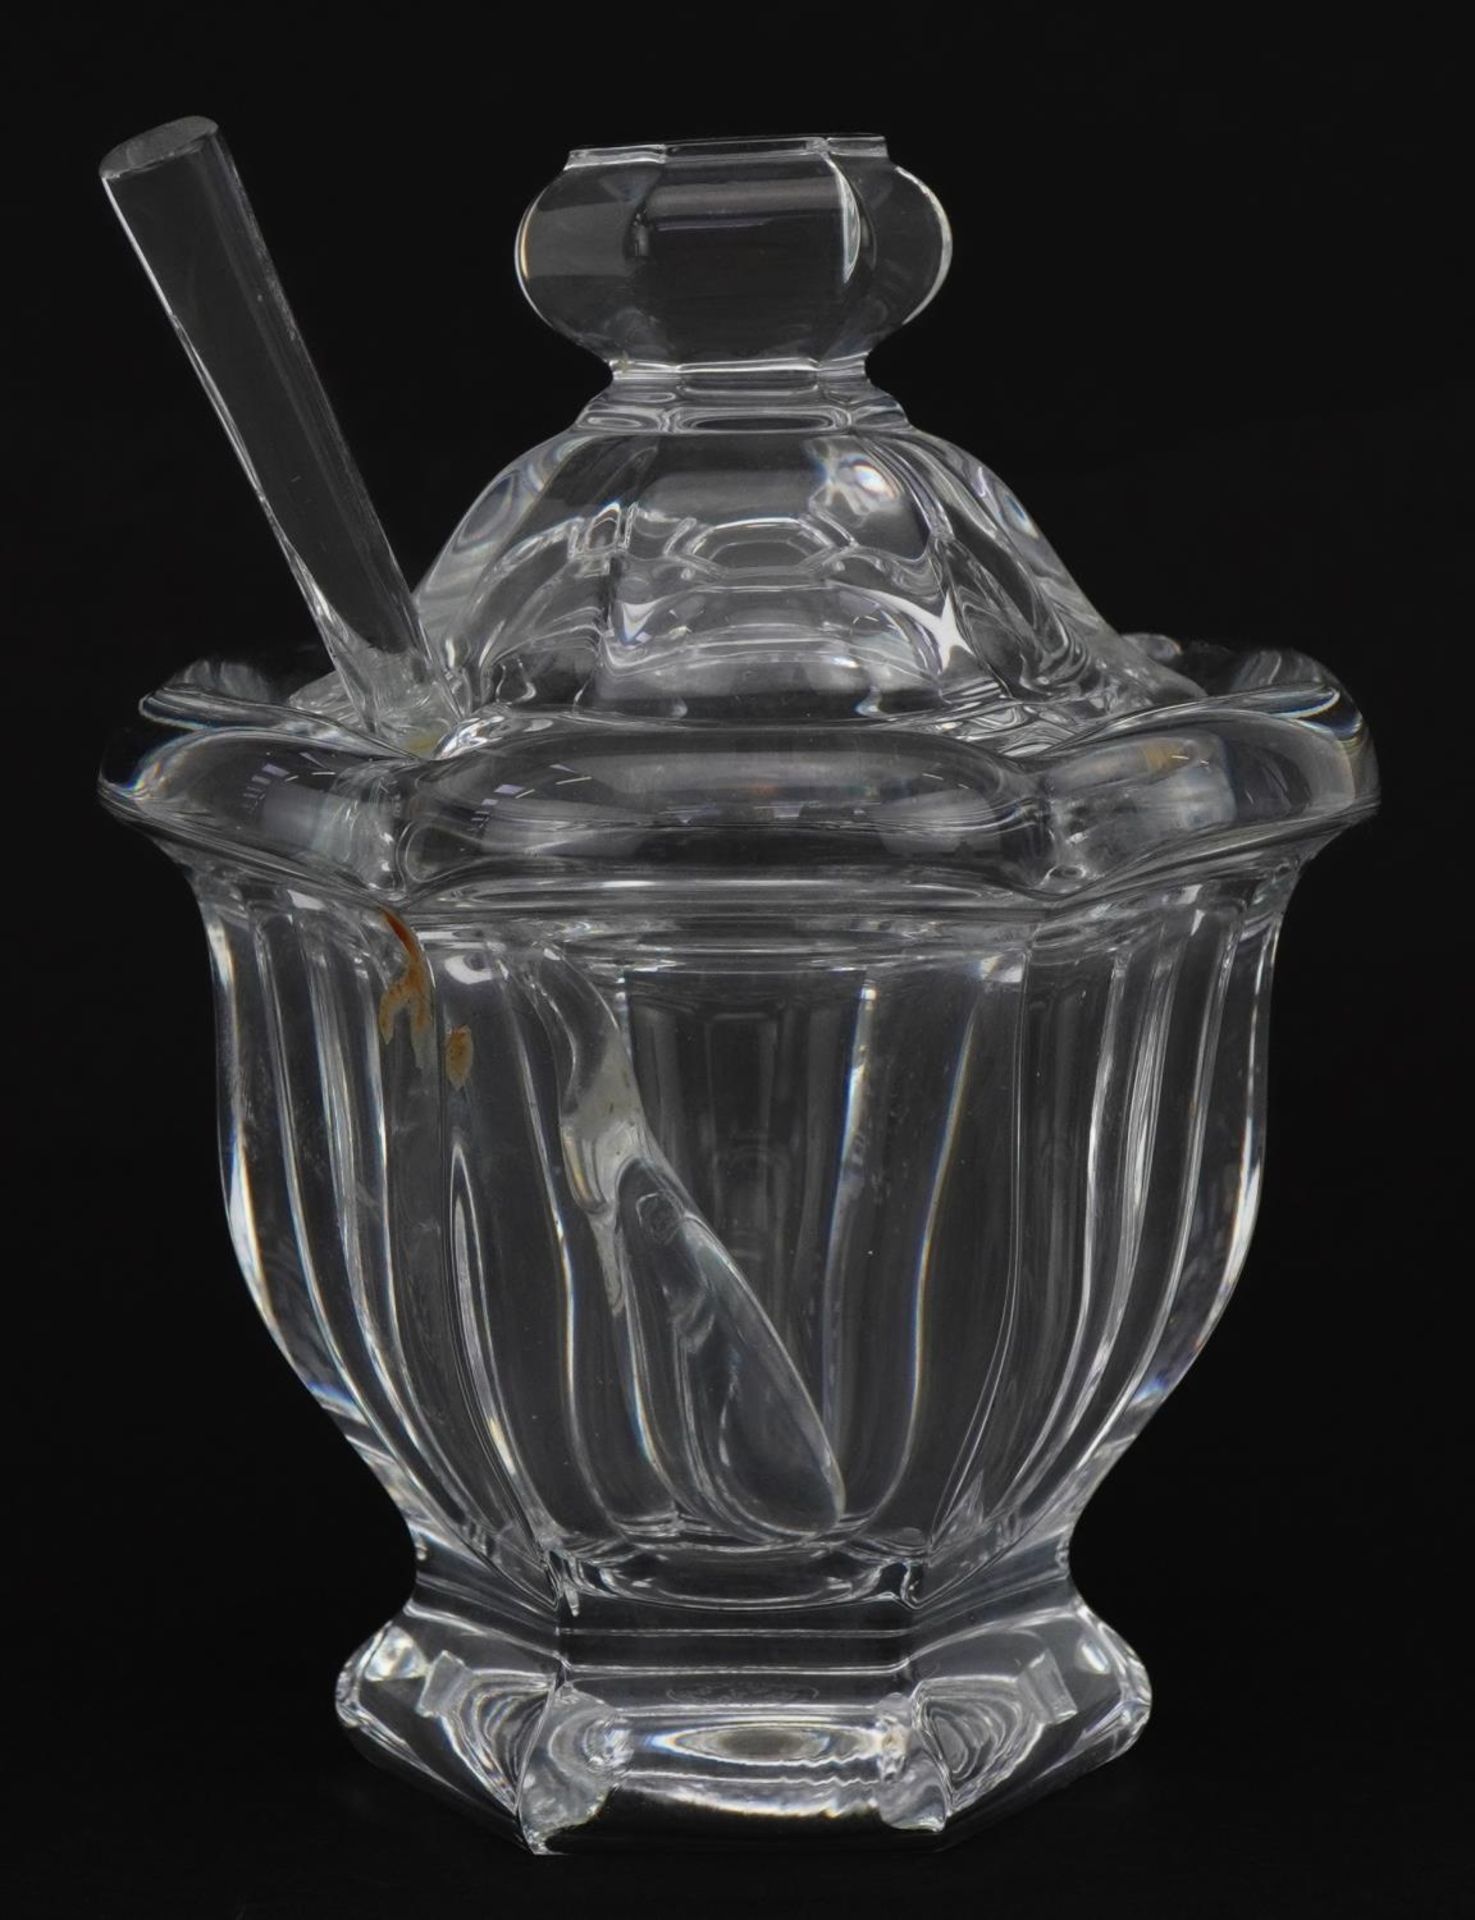 Baccarat, French crystal sauce lidded preserve pot with spoon, 11.5cm high - Image 3 of 8